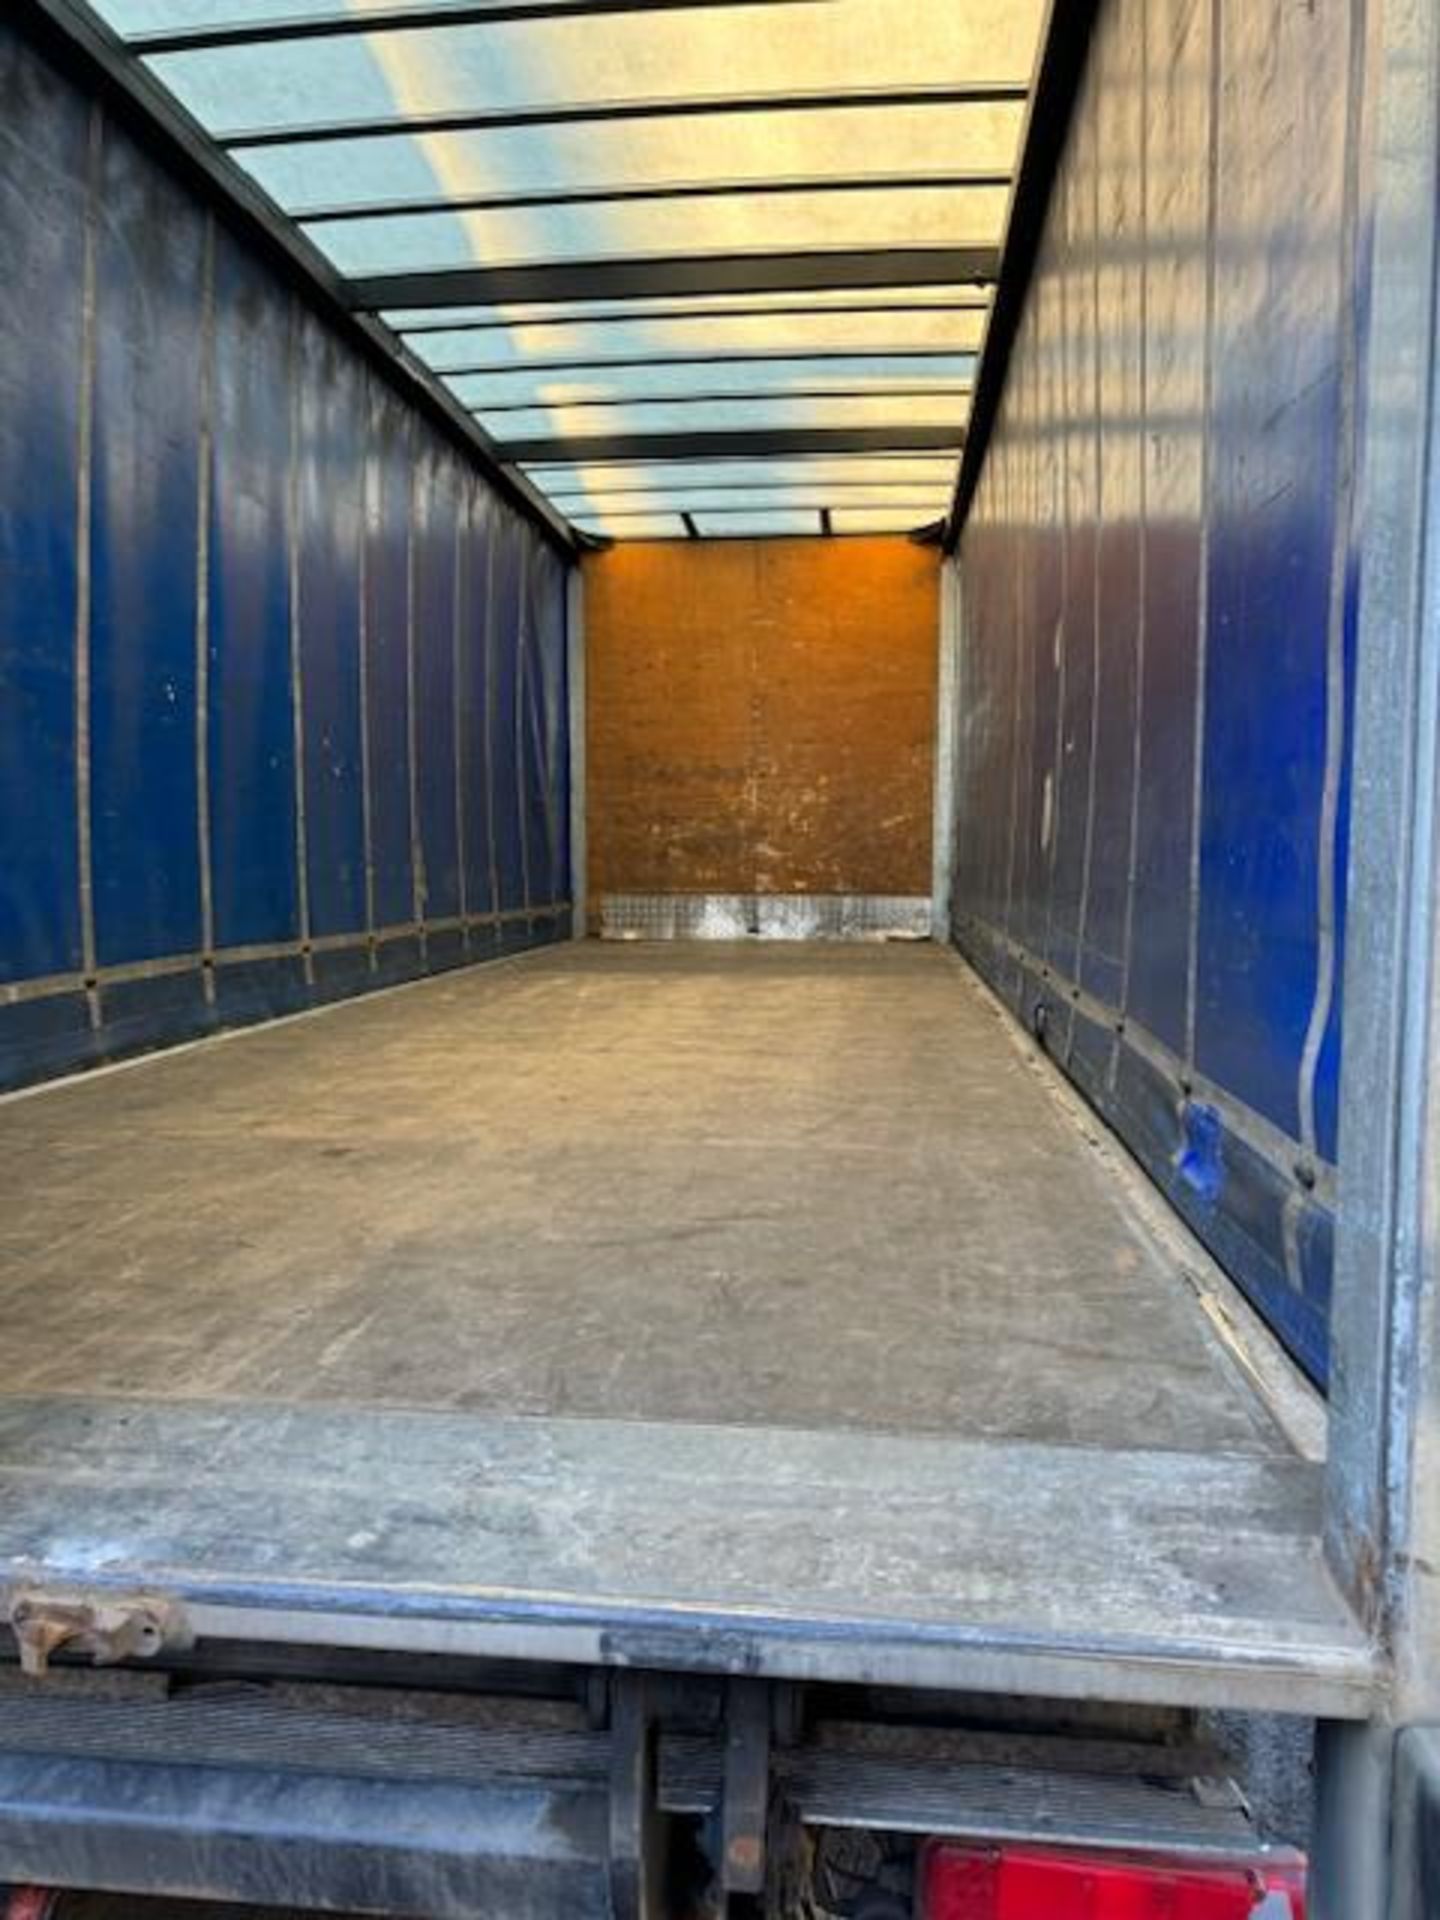 MAN euro 6 18t curtainside lorry with foldaway tail lift - Image 11 of 18